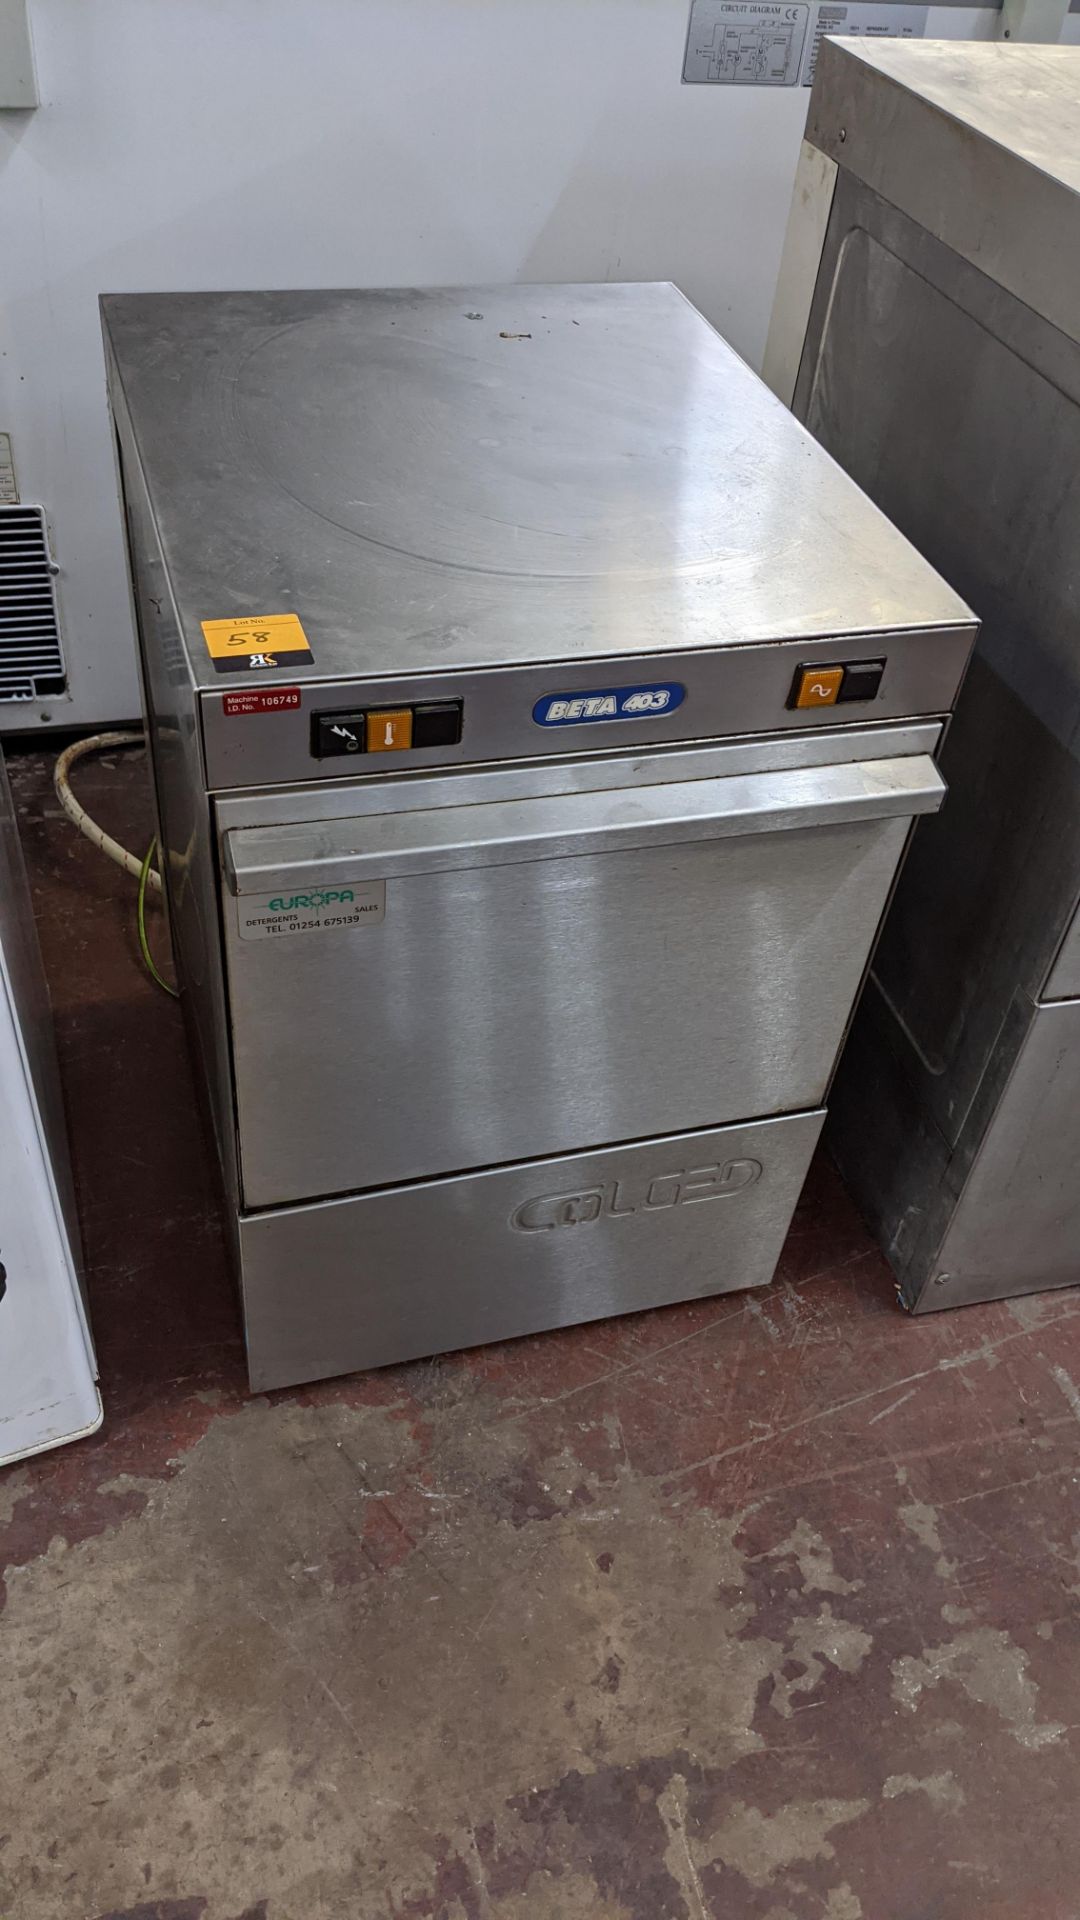 Beta 403 stainless steel commercial glass washer